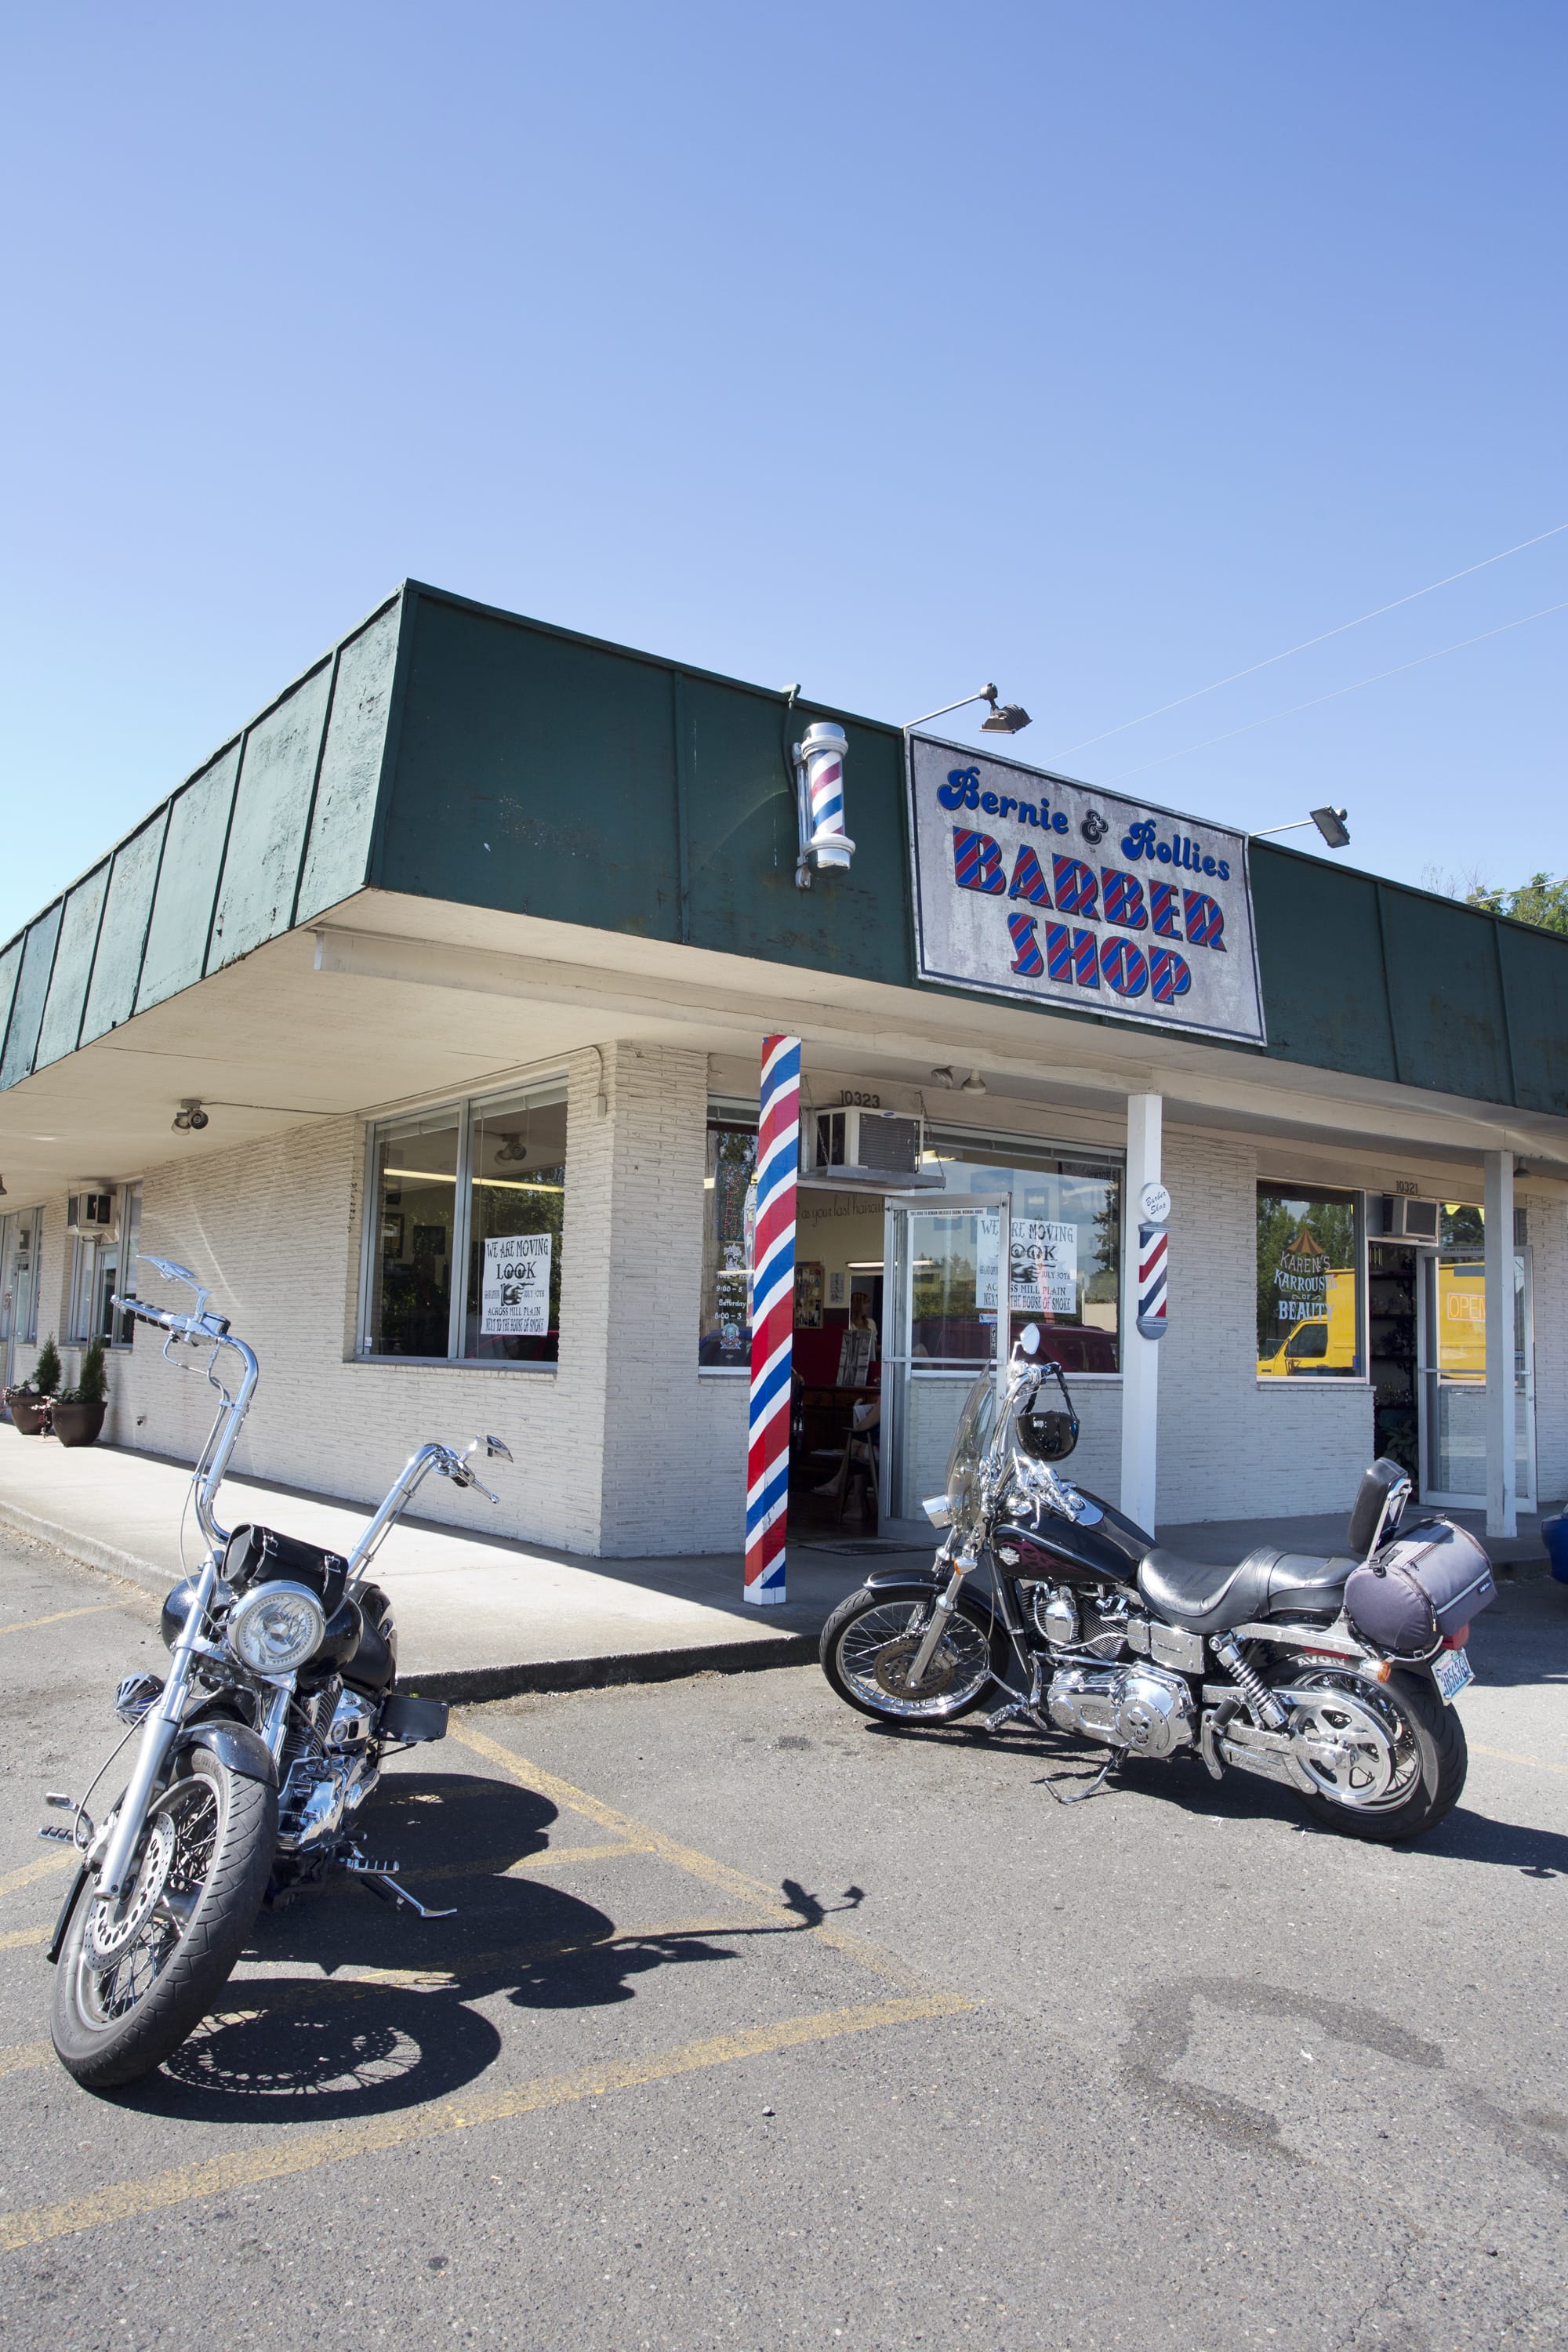 Bernie &amp; Rollies Barber Shop will close Saturday after being in its current location for 47 years.